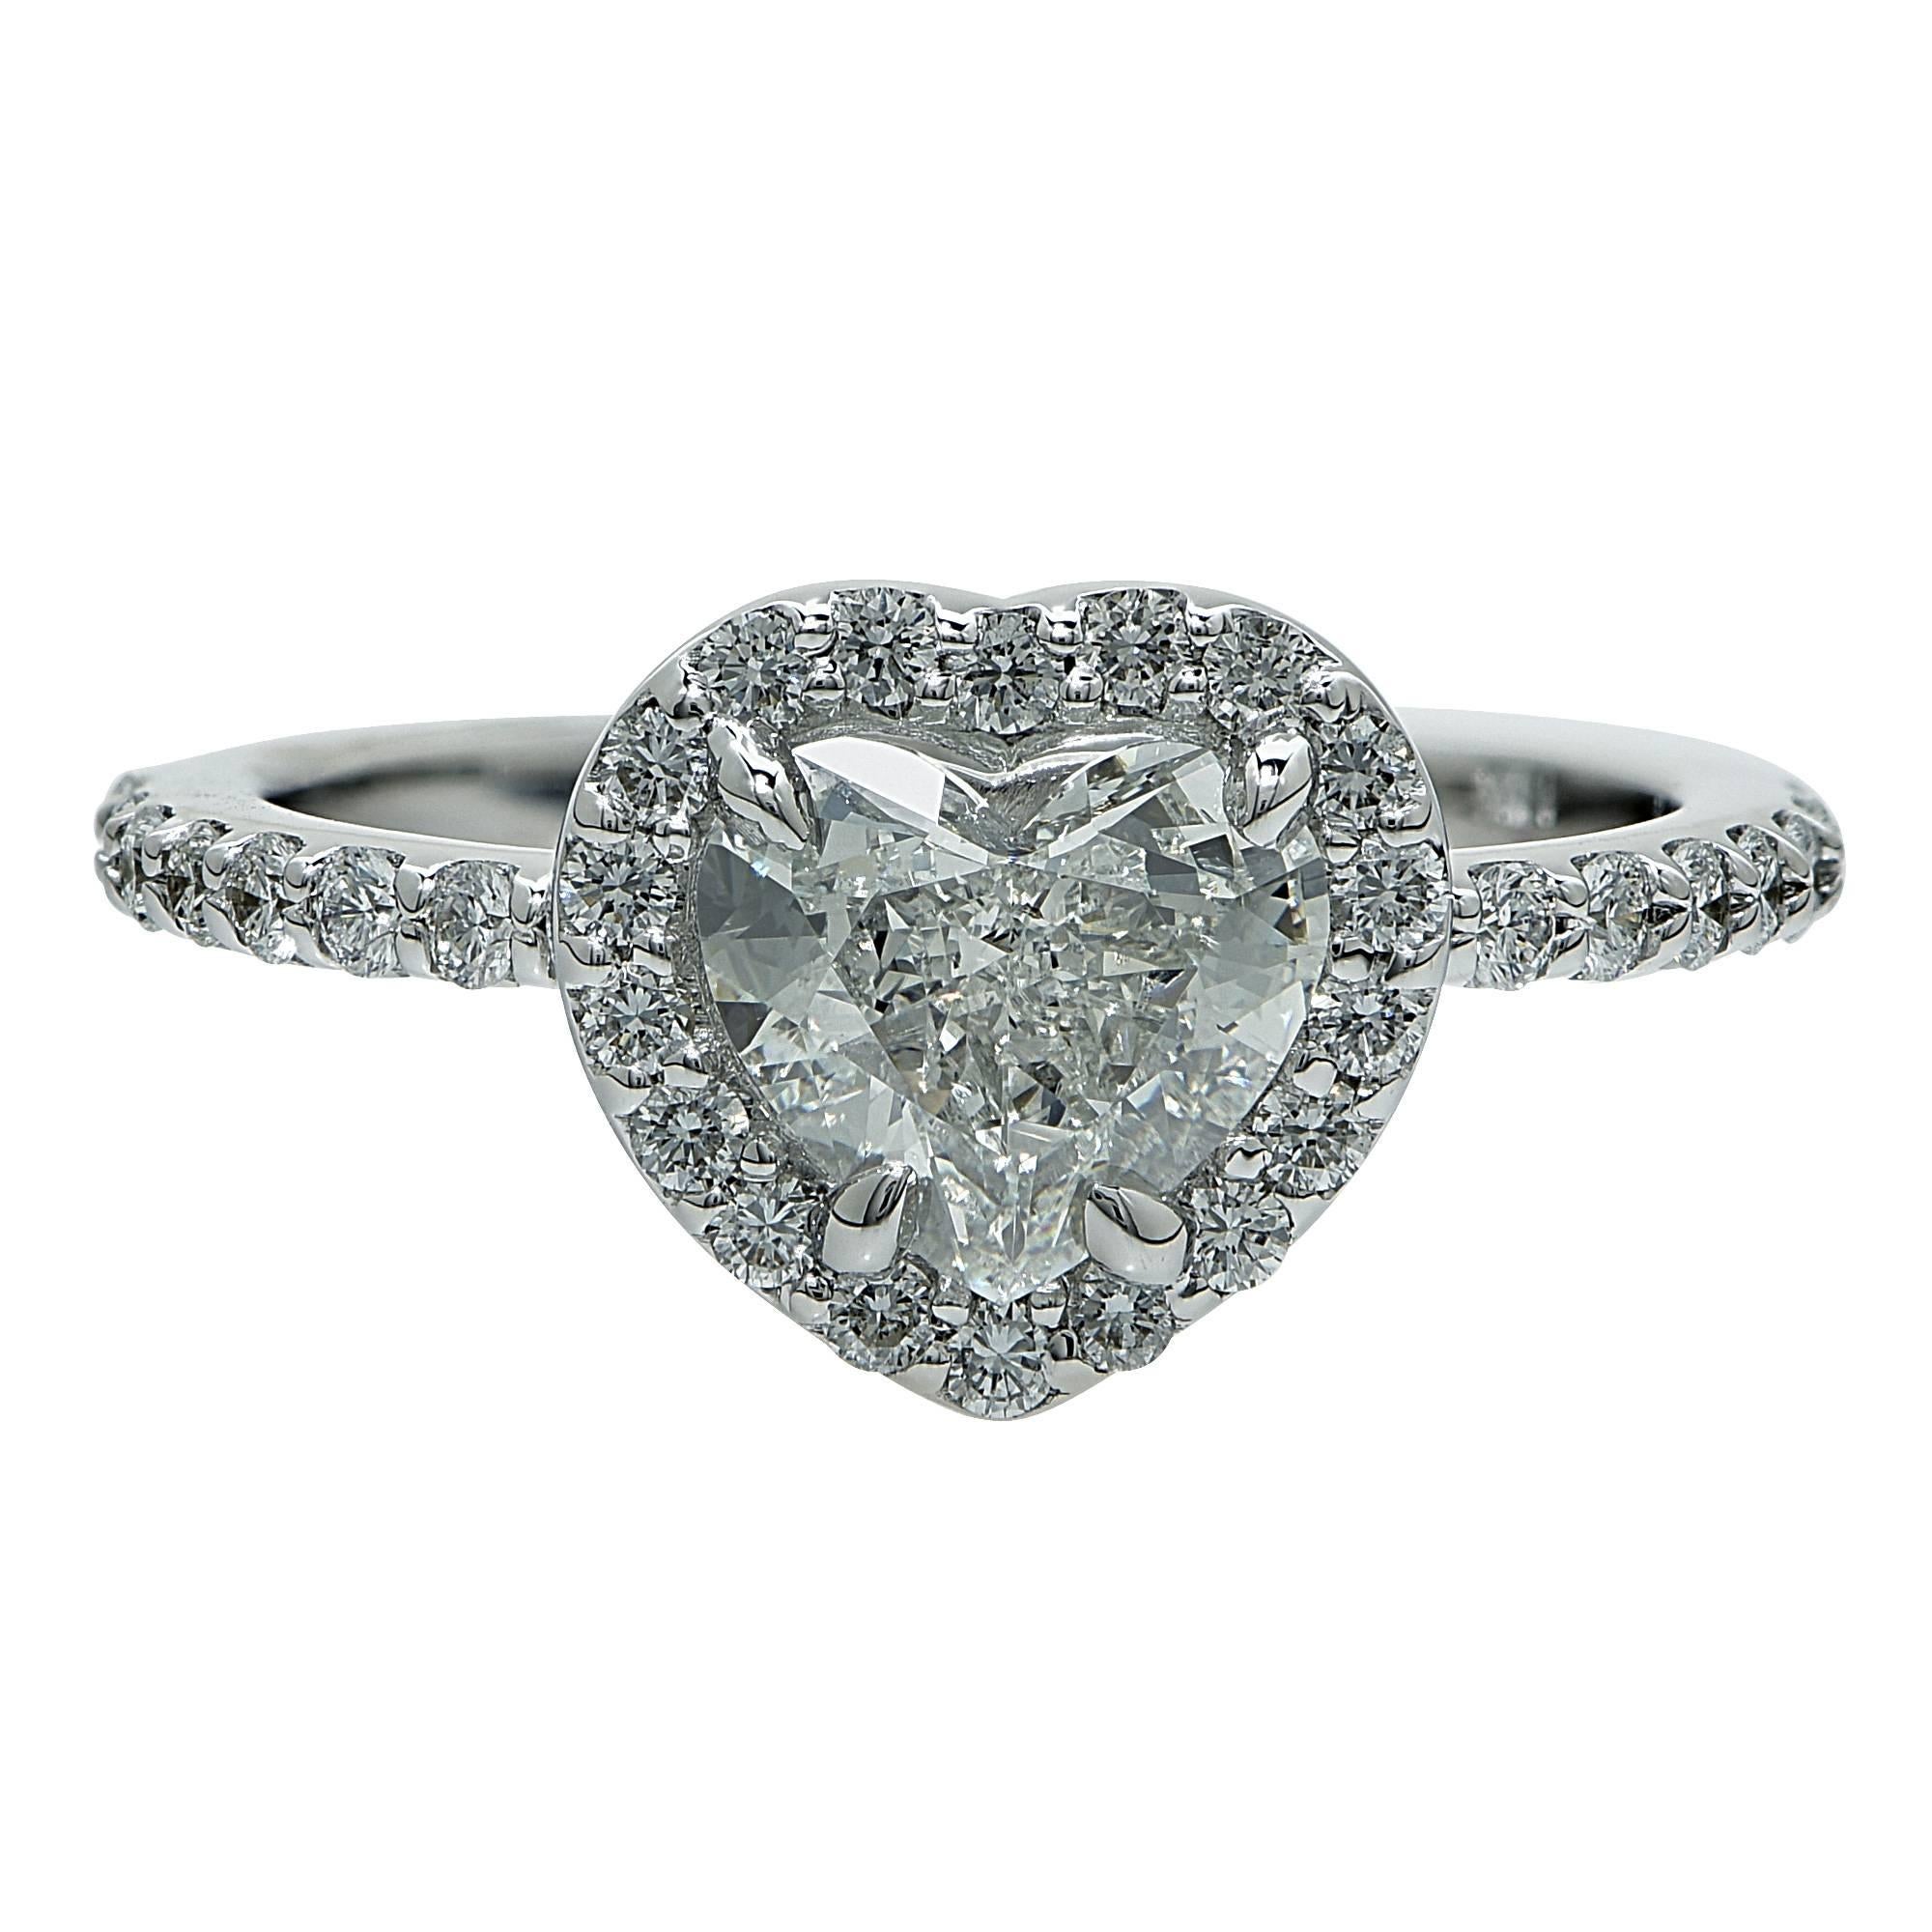 18k white gold hand-crafted ring featuring a GIA graded 1.00ct heart shape cut diamond, H color, SI1 clarity, and accented by 34 round brilliant cut diamonds weighing approximately .50cts, G color, VS clarity.

Ring size: 5.5 (can be sized up or